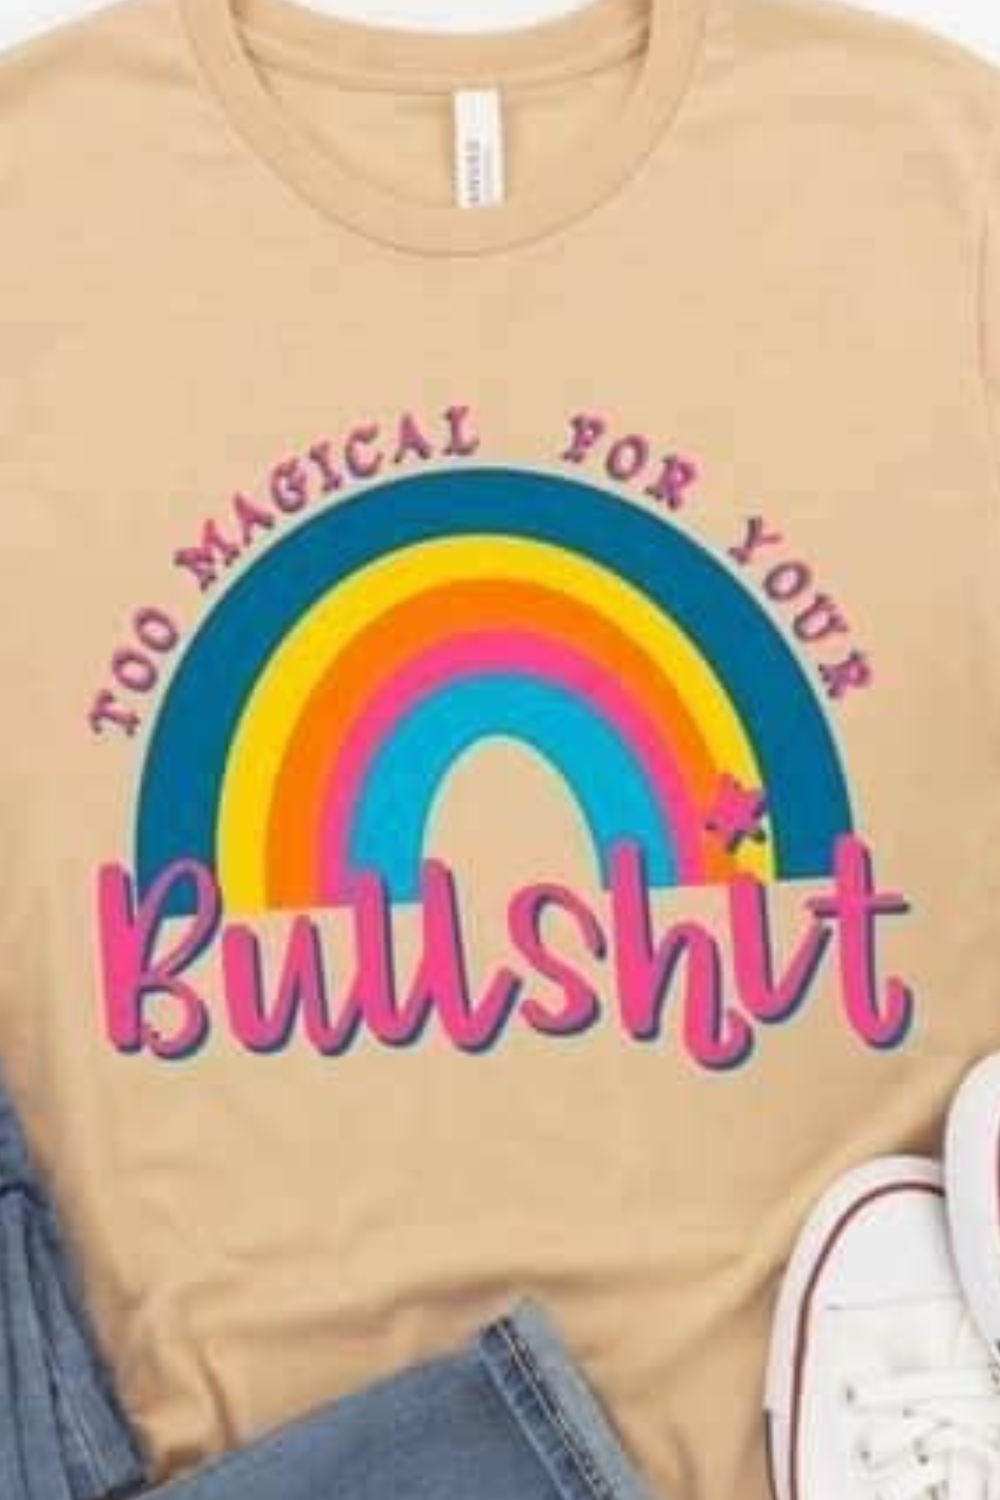 TOO MAGICAL FOR YOUR BULLSHIT Graphic Tee